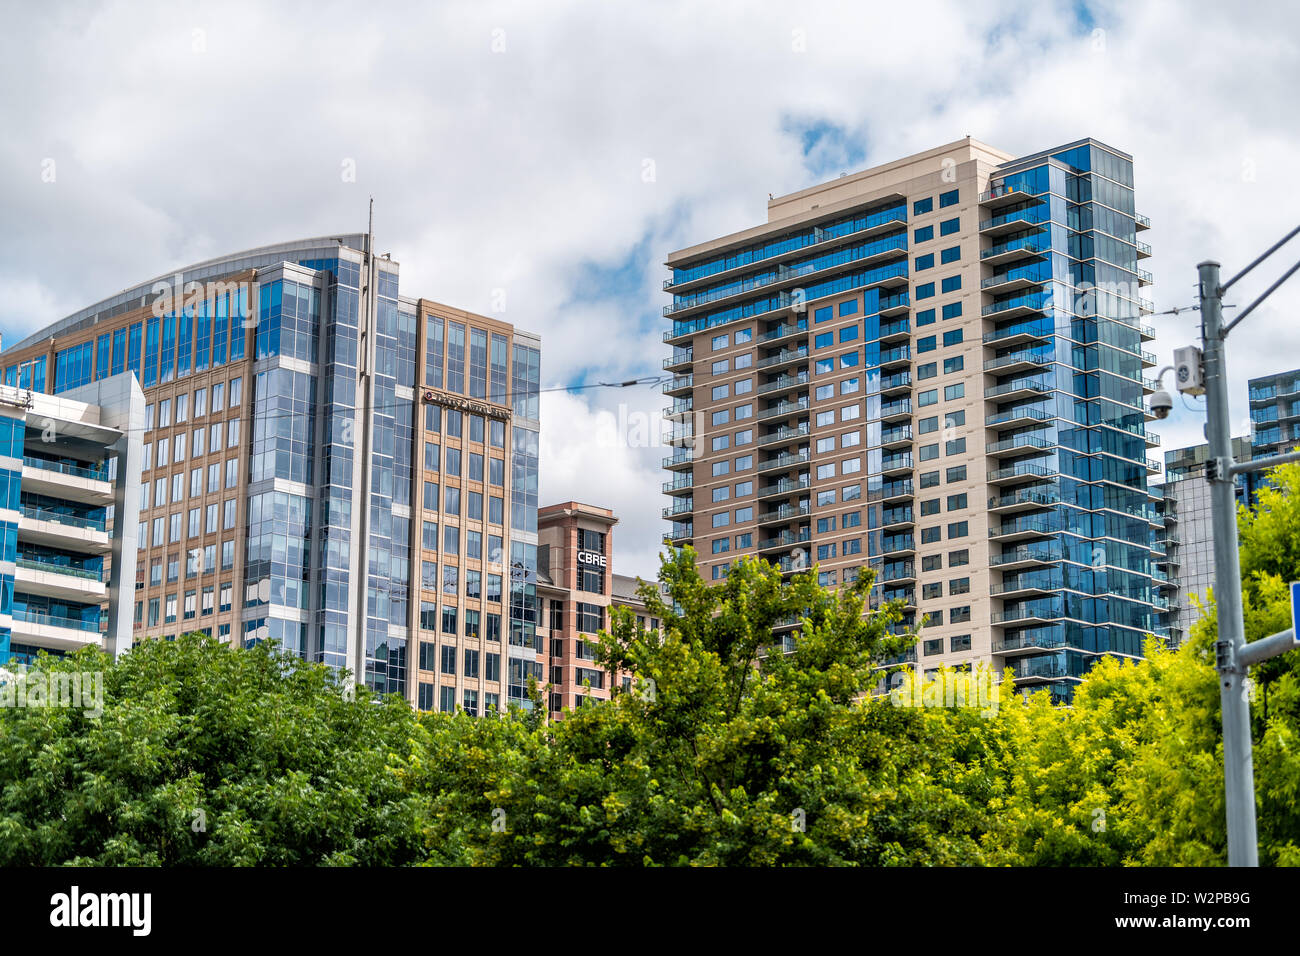 Dallas, USA - June 7, 2019: Downtown cityscape buildings in city near Klyde Warren park with sign for Texas Capital Bank and CBRE Stock Photo